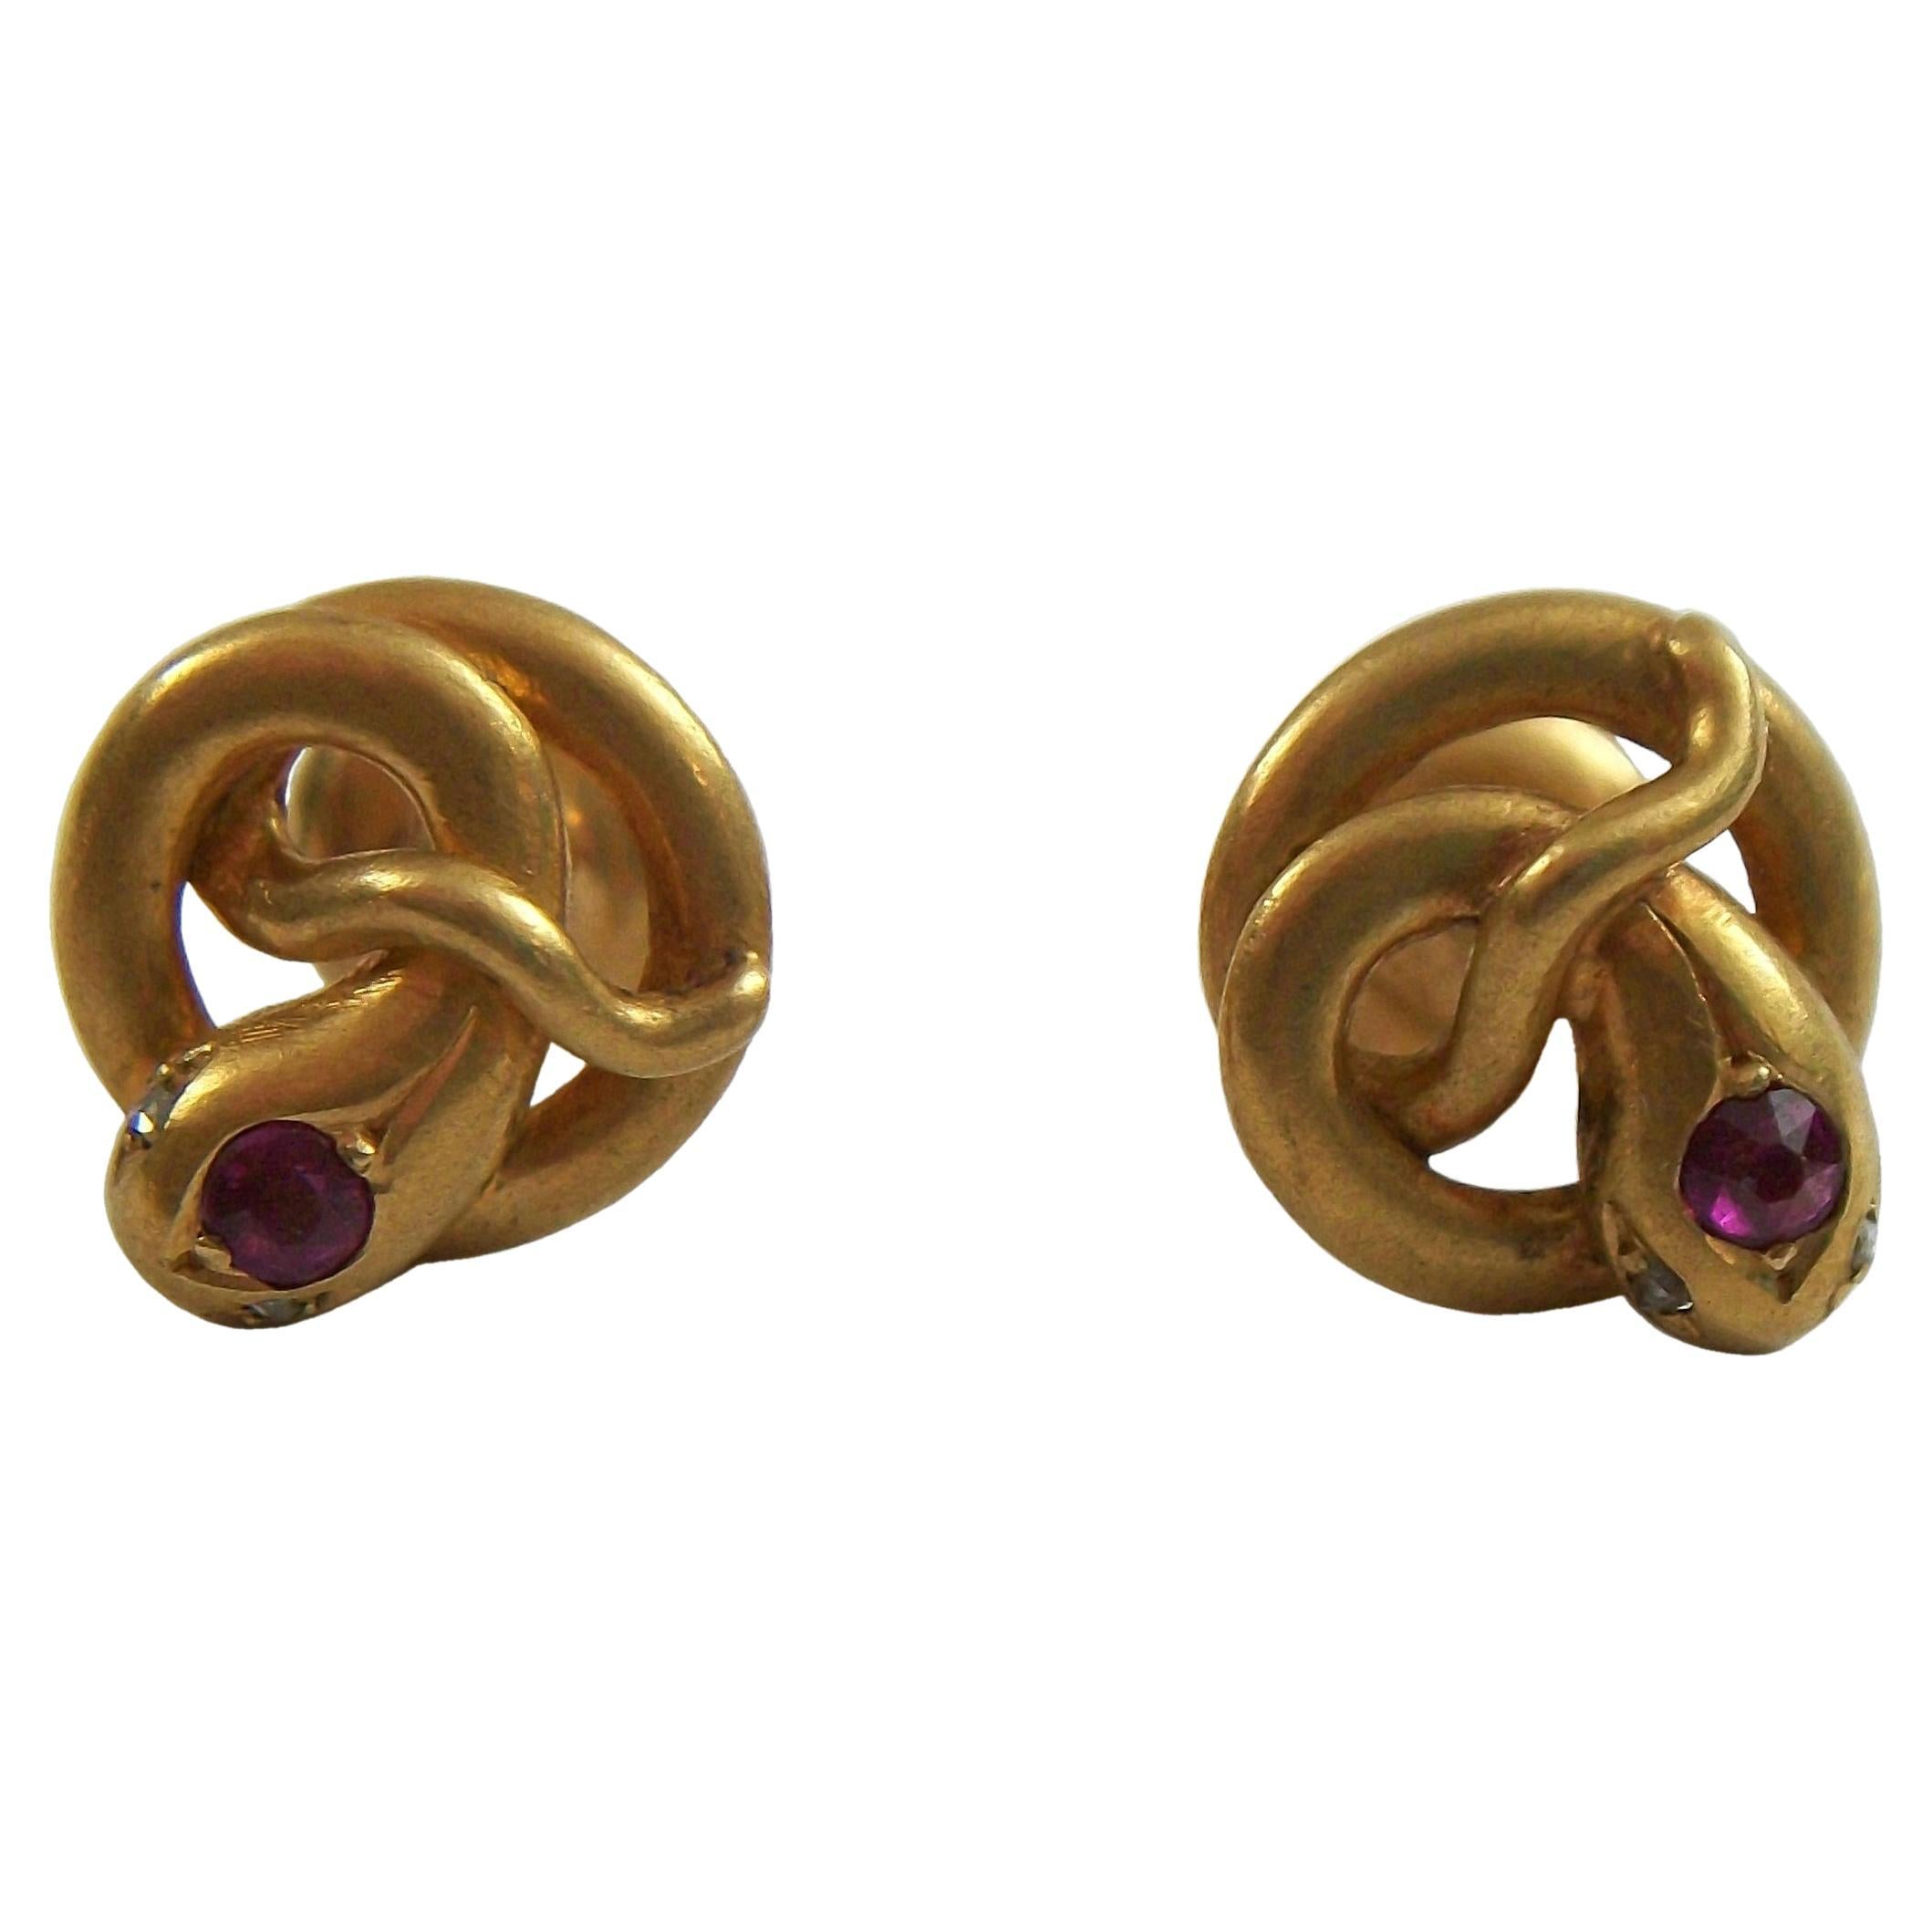 Antique Pair of 18K Yellow Gold Snake Buttons - France - Late 19th Century For Sale